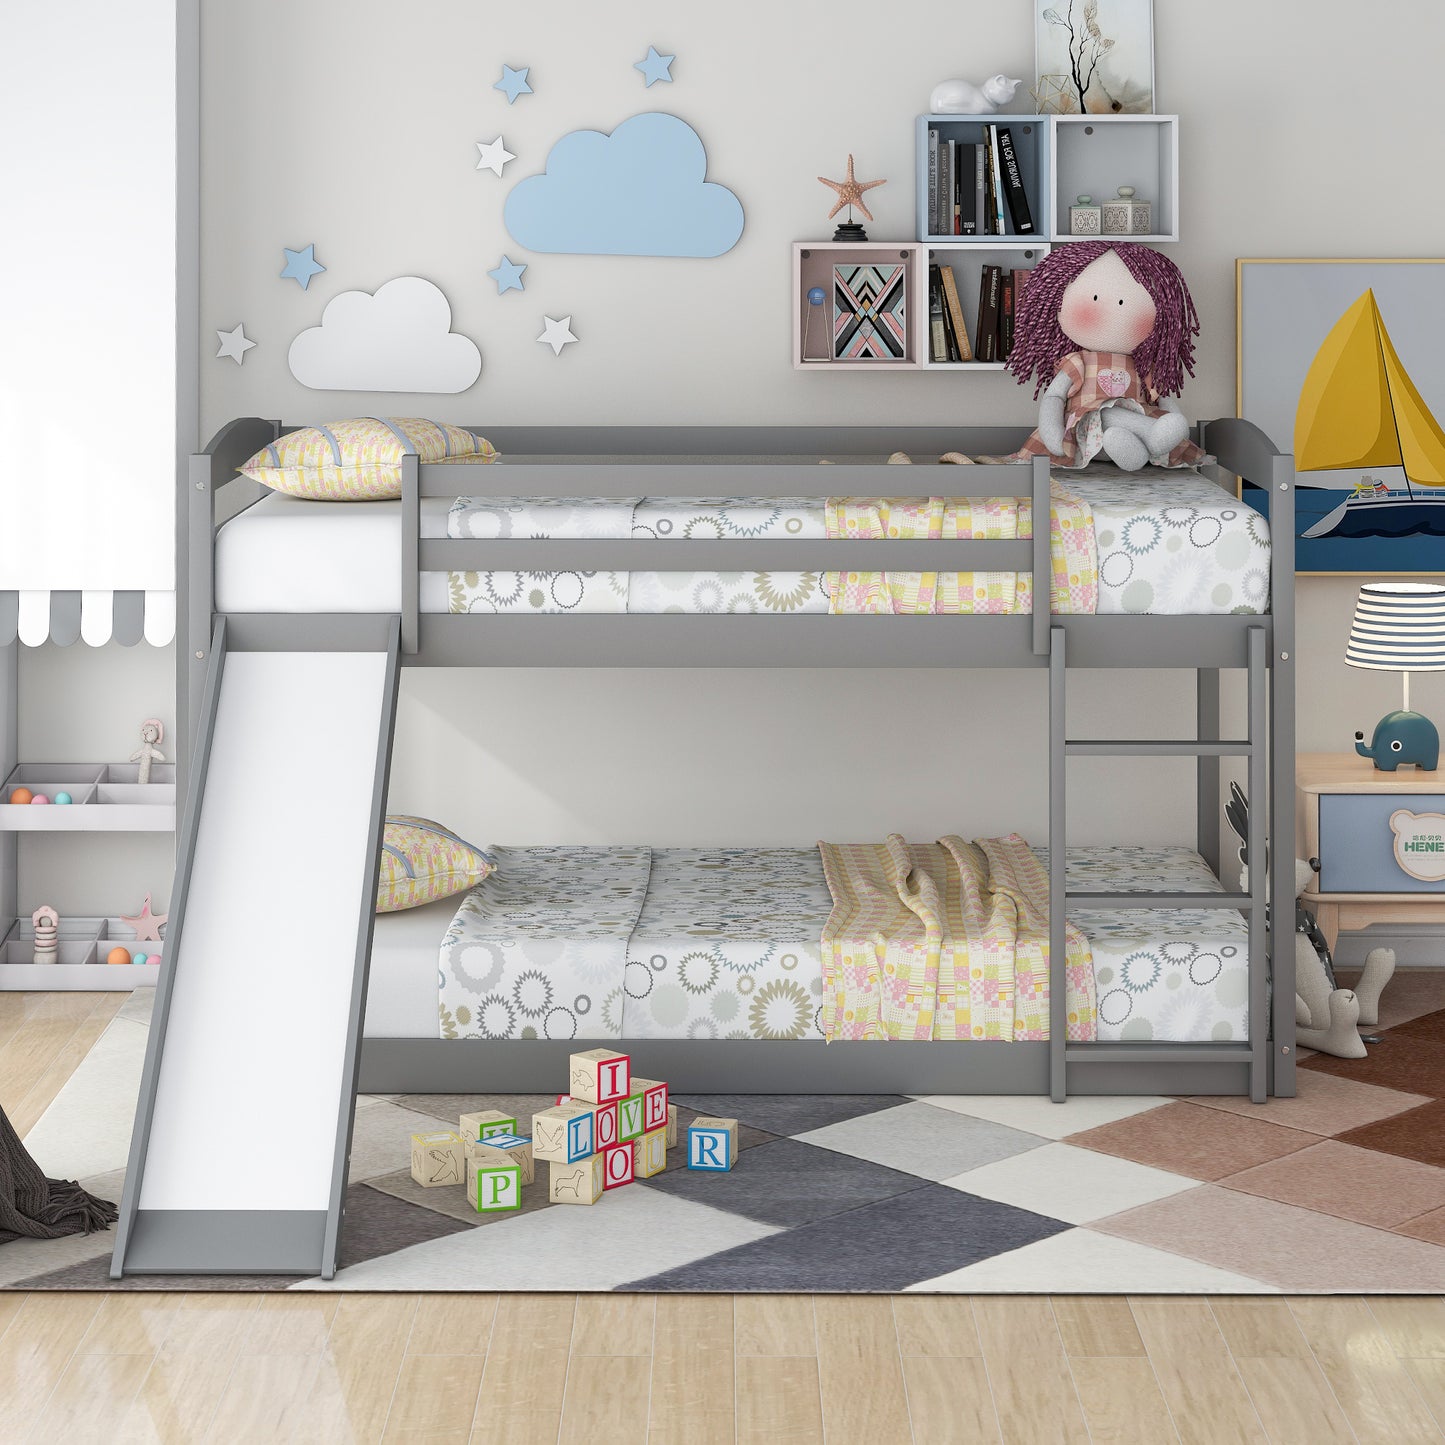 White Twin Bunk Beds with Slide for Kids, Low Profile Bunk Beds with Built-in Ladder, Kids Bedroom Furniture Floor Bed Frame for Toddlers Boys Girls, No Box Spring Needed, Hold 400LBS